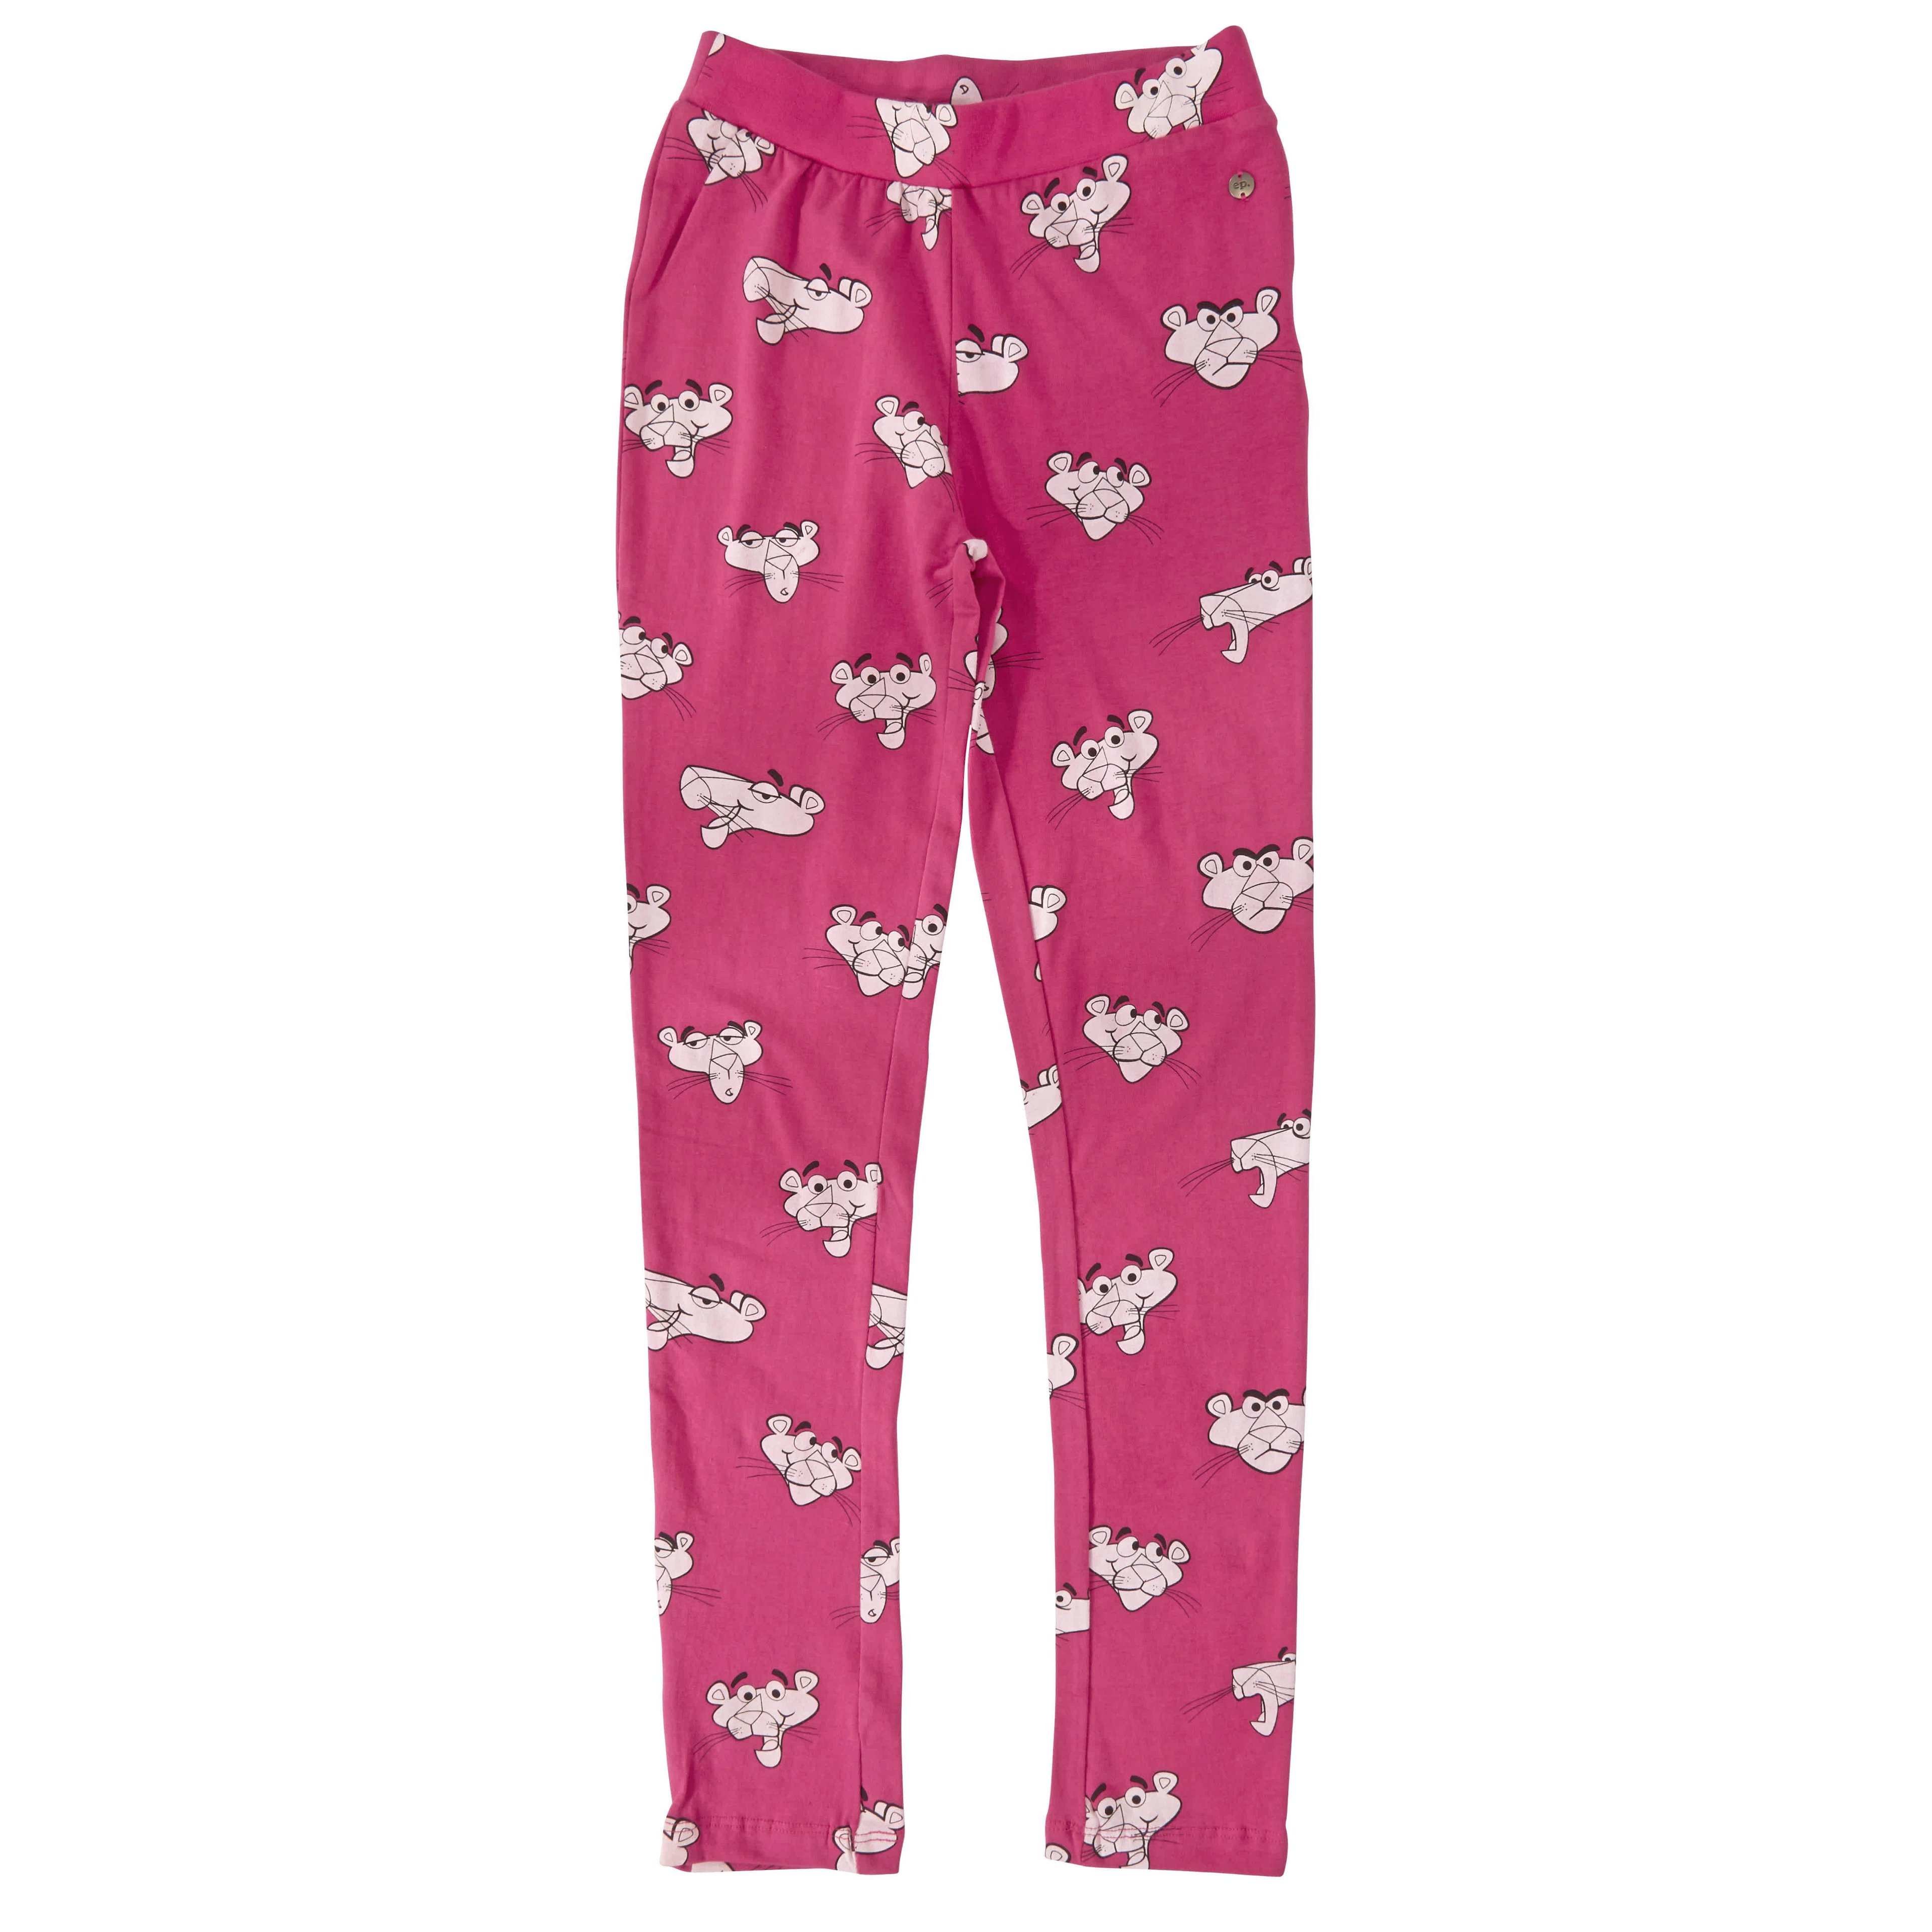 Eleven Paris Girls The Pink Panther Printed Leggings by ELEVEN PARIS